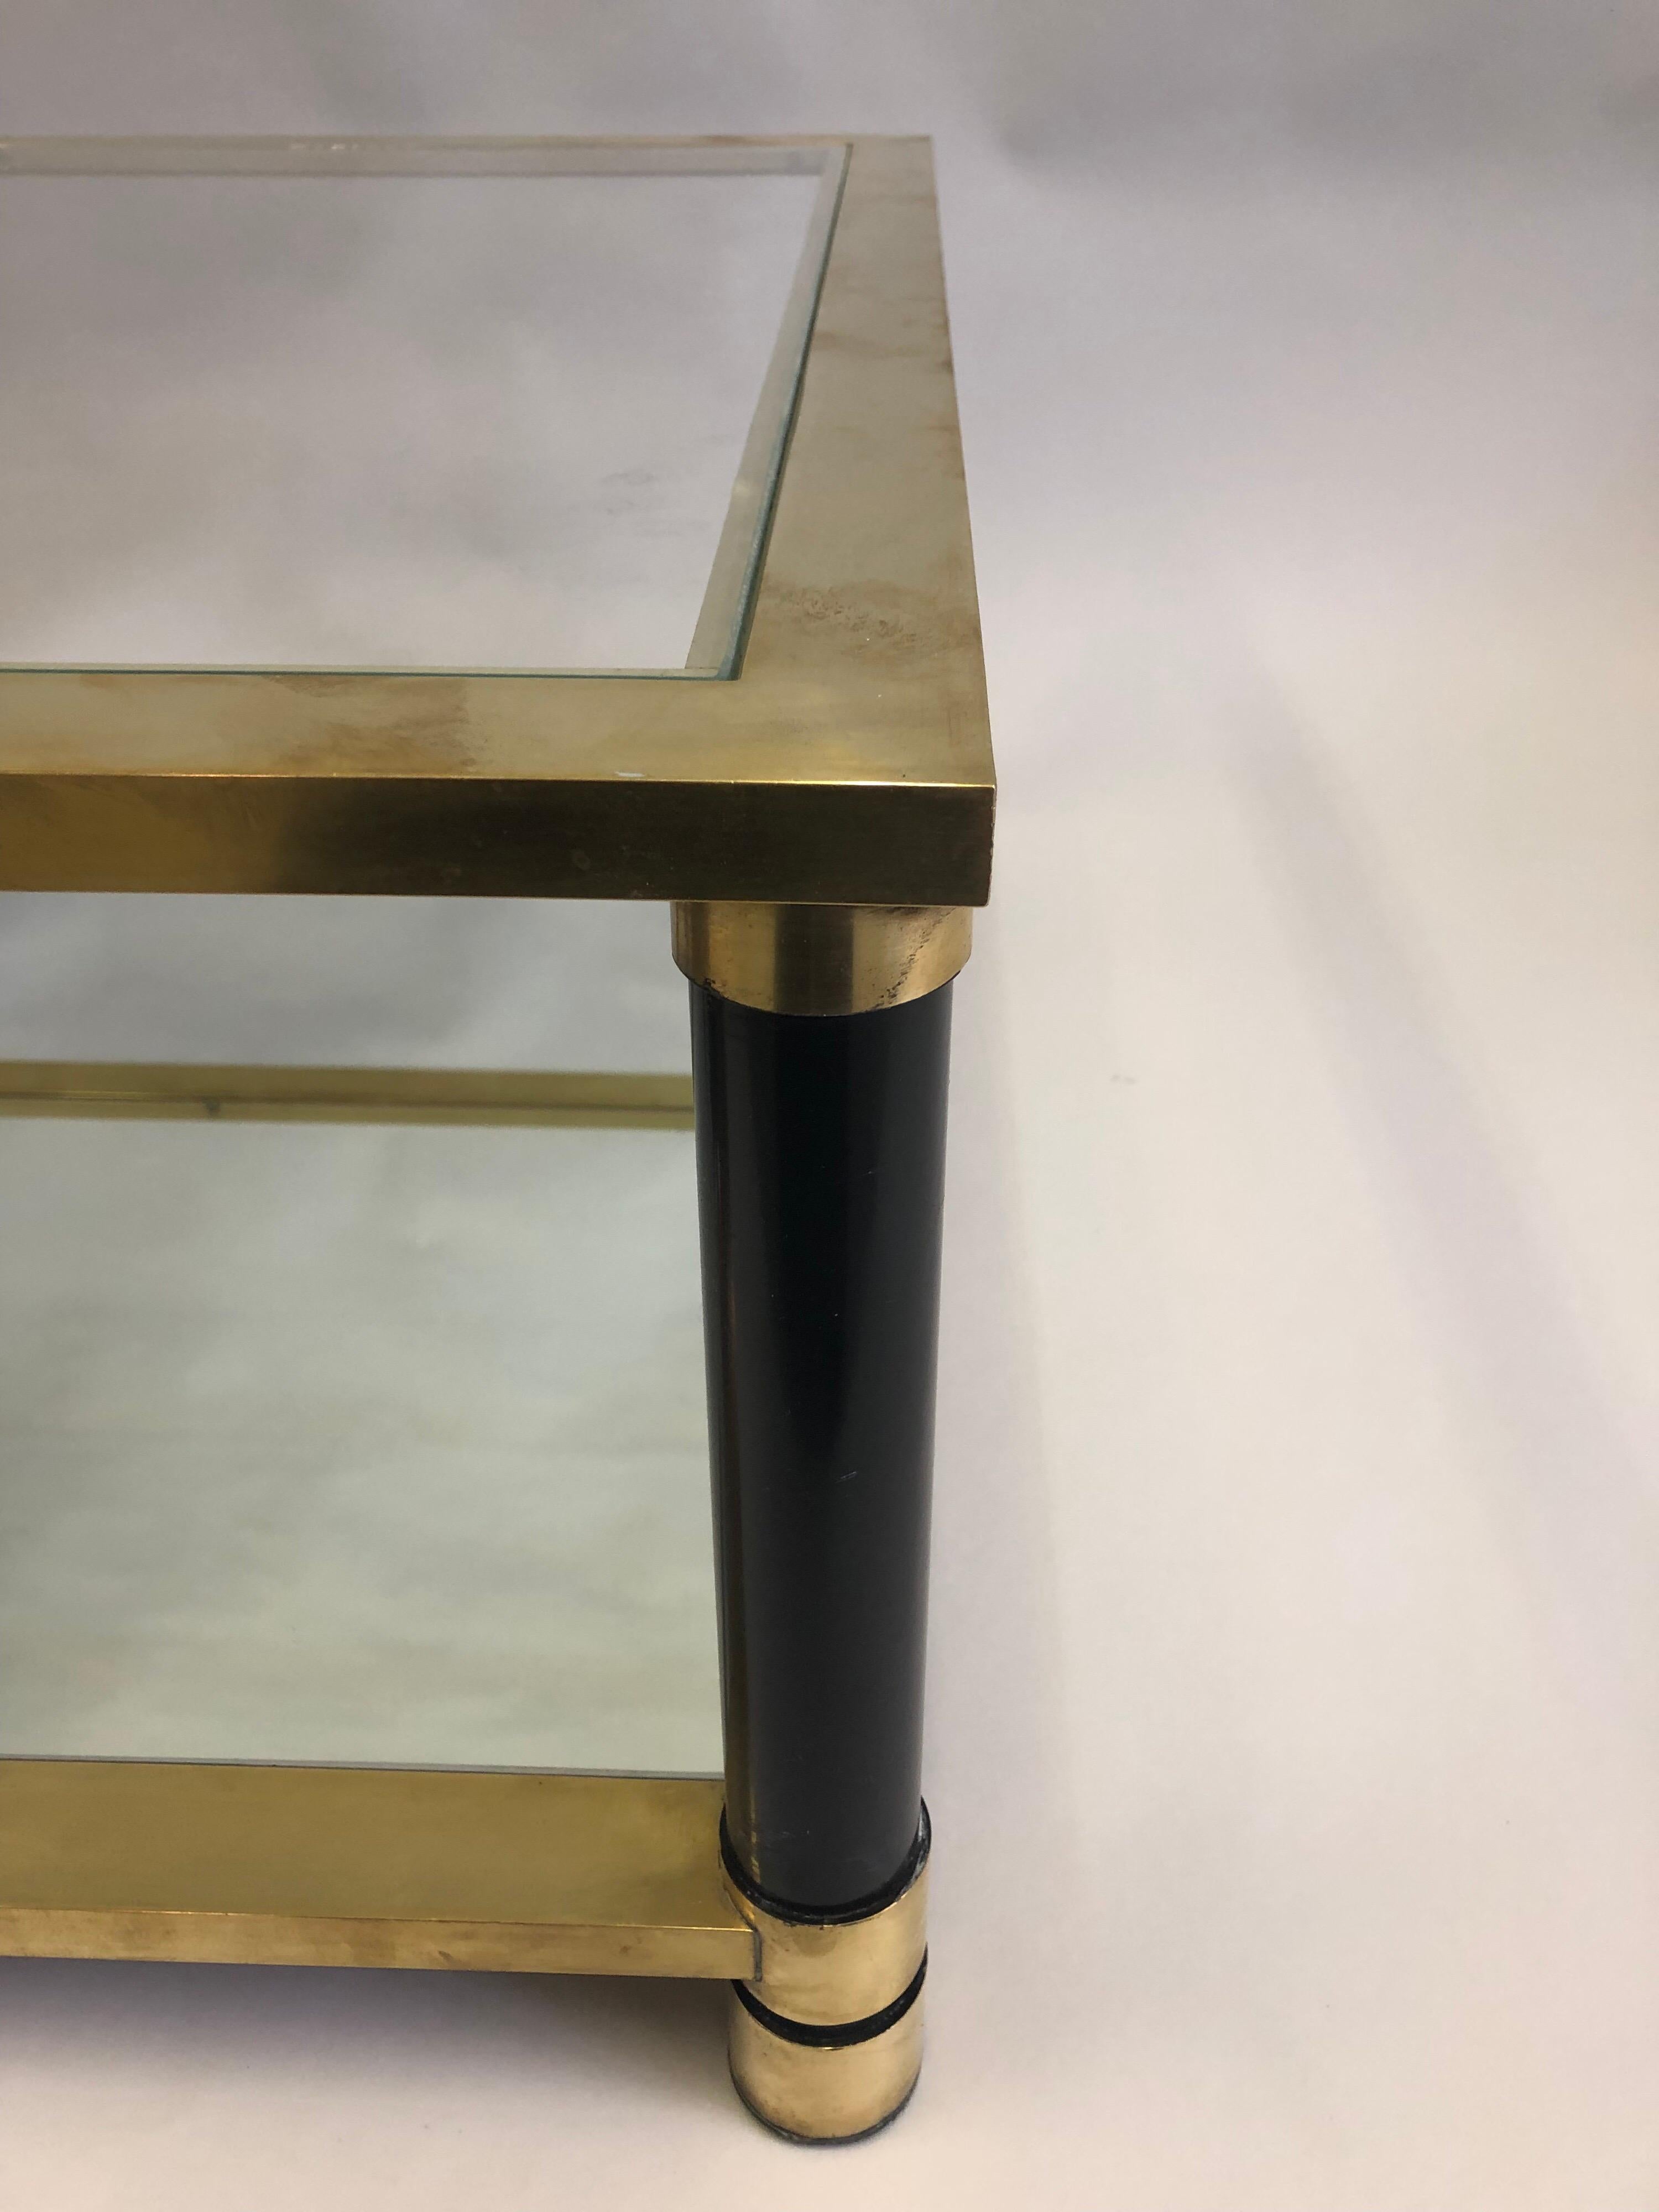 Large French Mid-Century Modern Double Level Brass Coffee Table, Maison Charles (20. Jahrhundert)